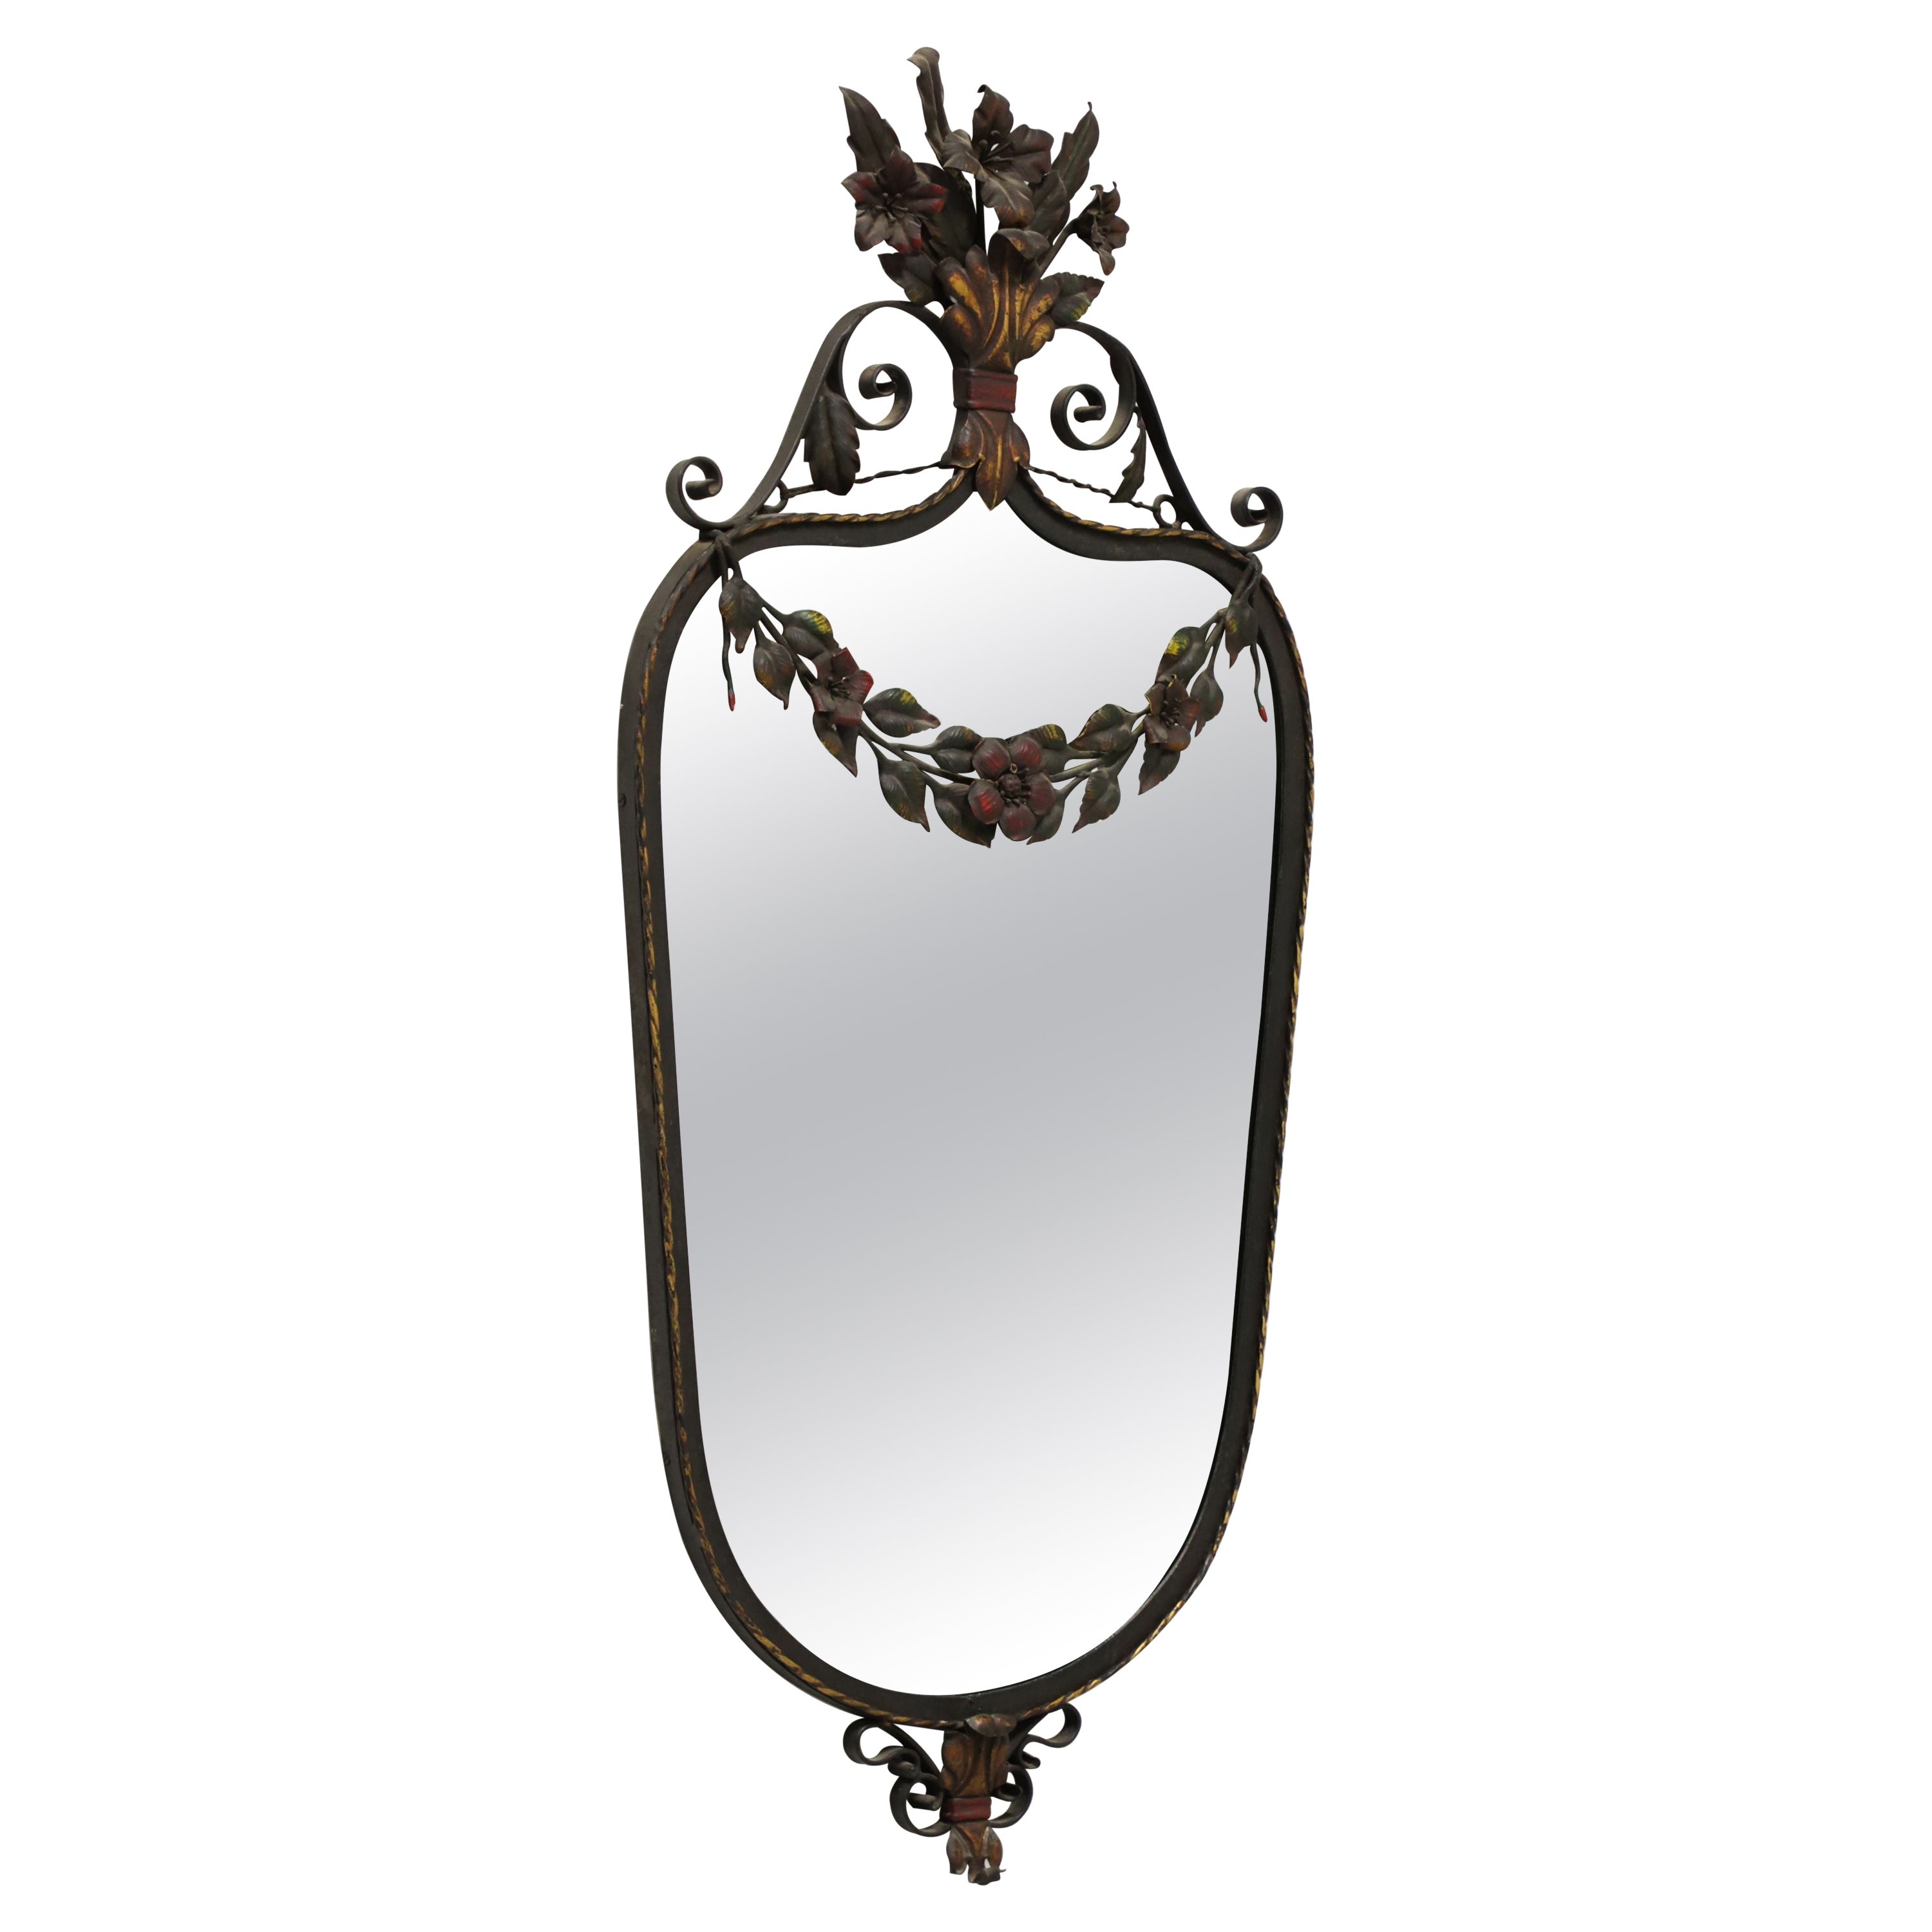 Antique Metal Framed Wall Mirror with Floral Motif